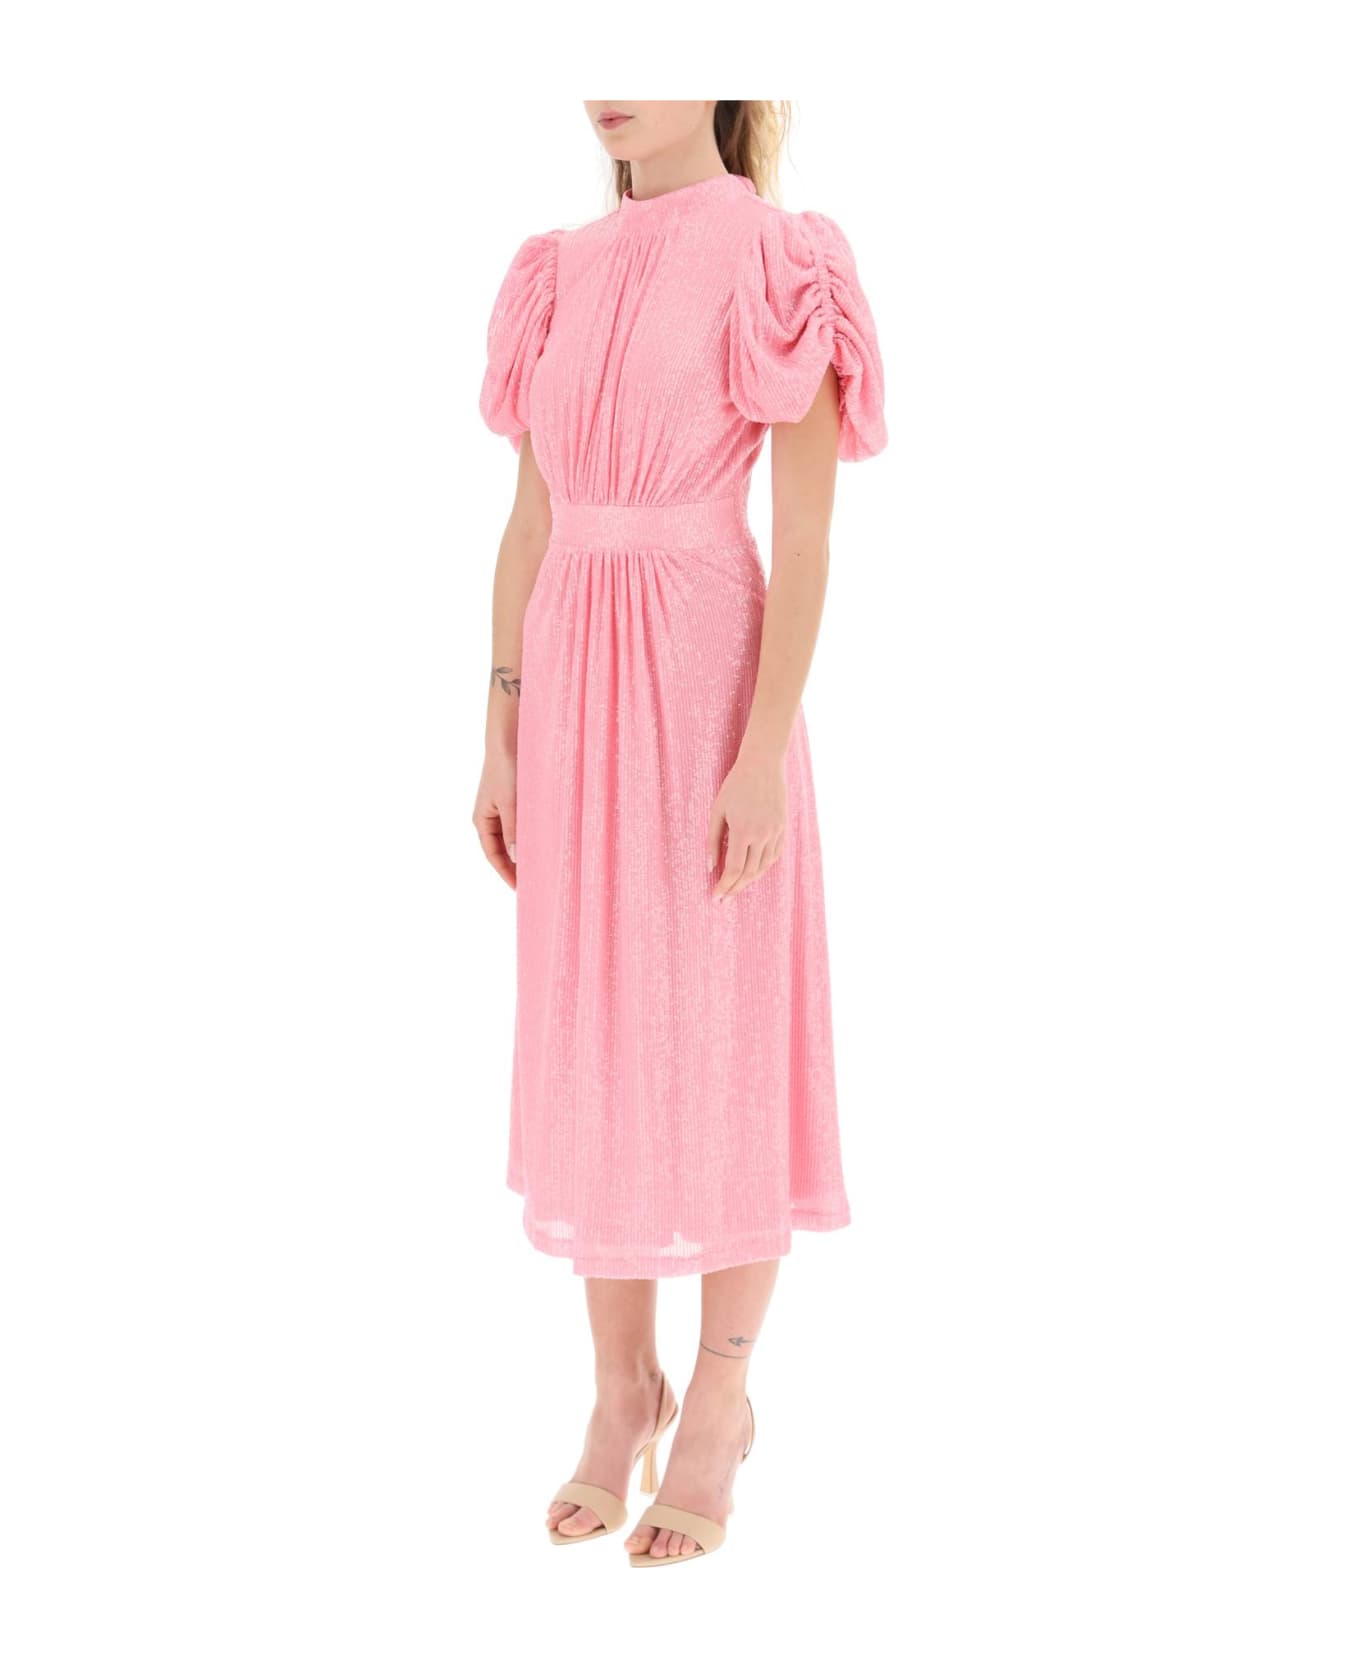 Rotate by Birger Christensen 'noon' Puff Sleeve Sequined Dress - BEGONIA PINK (Pink) ワンピース＆ドレス